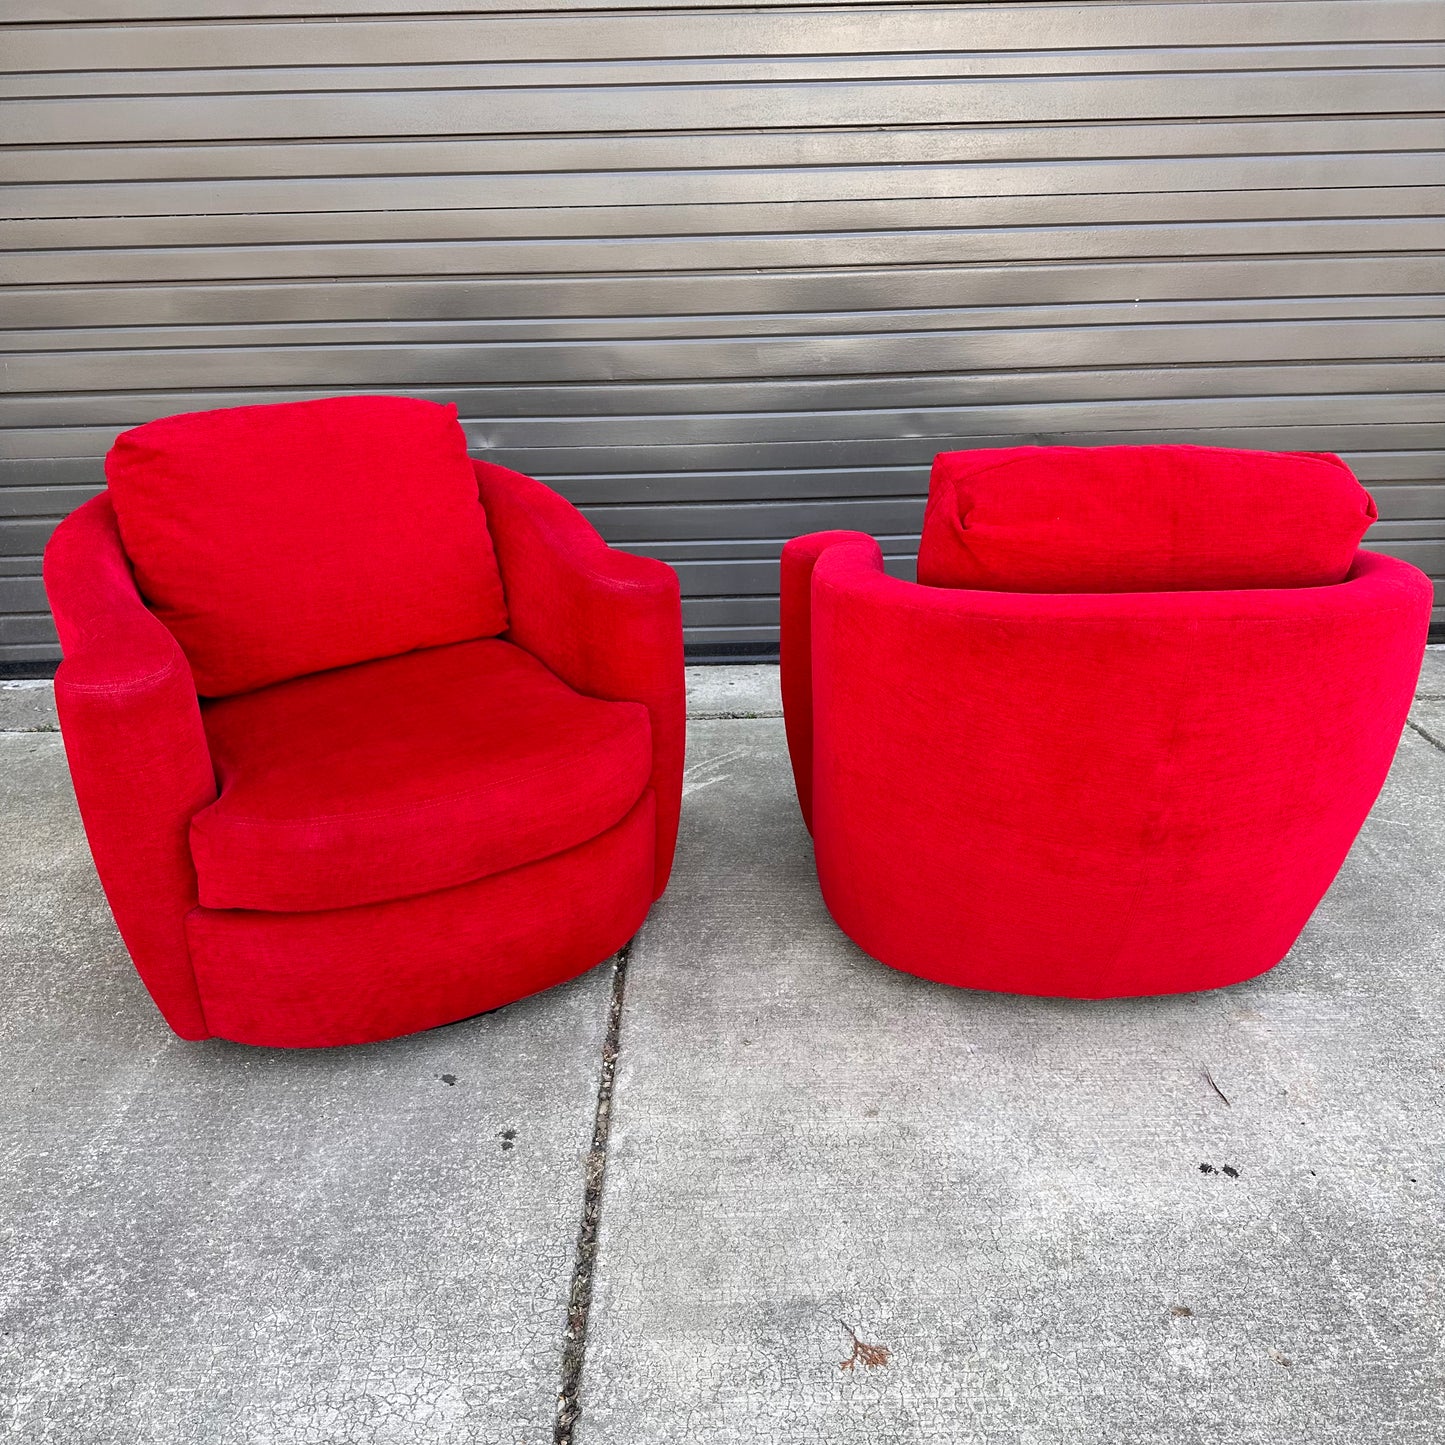 VLADIMIR KAGAN STYLE LIPSTICK RED SWIVEL AND ROCK ACCENT CHAIRS FROM DIRECTIONAL - A PAIR